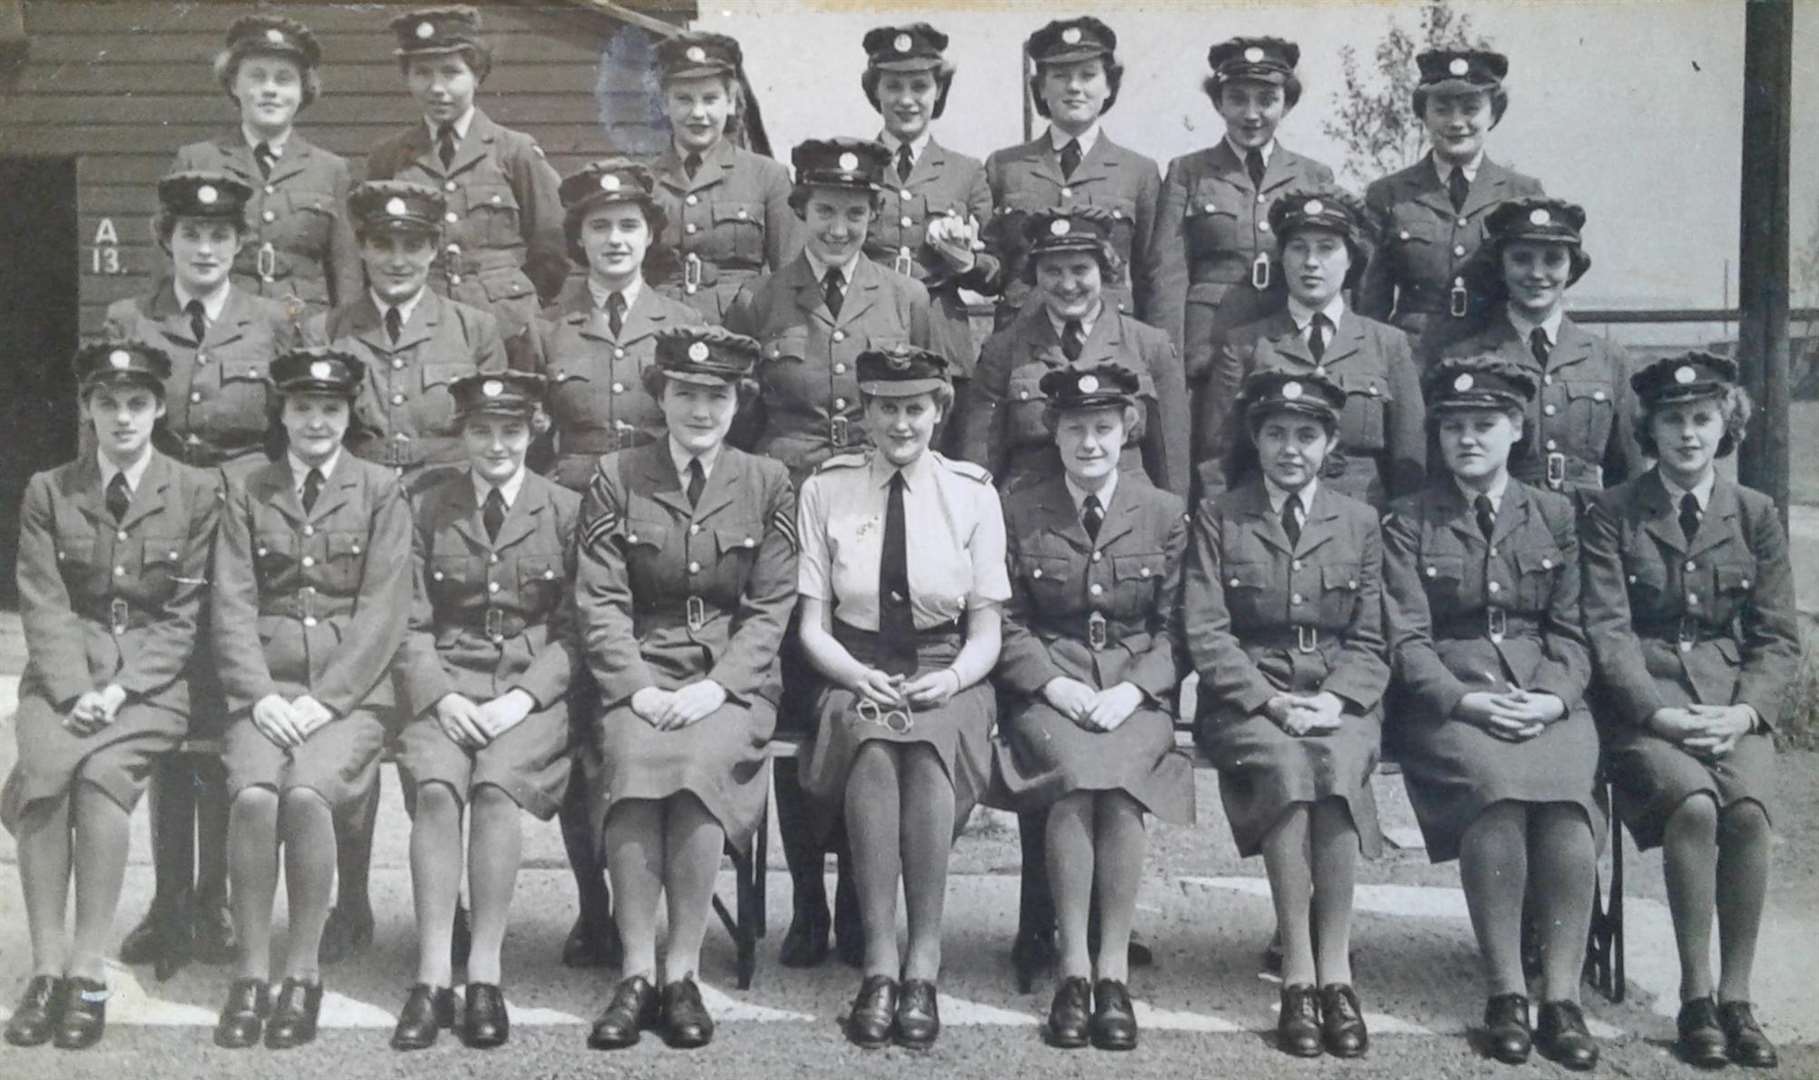 Barbara (second from left, middle row), pictured with fellow WAAF members at RAF Winslow.